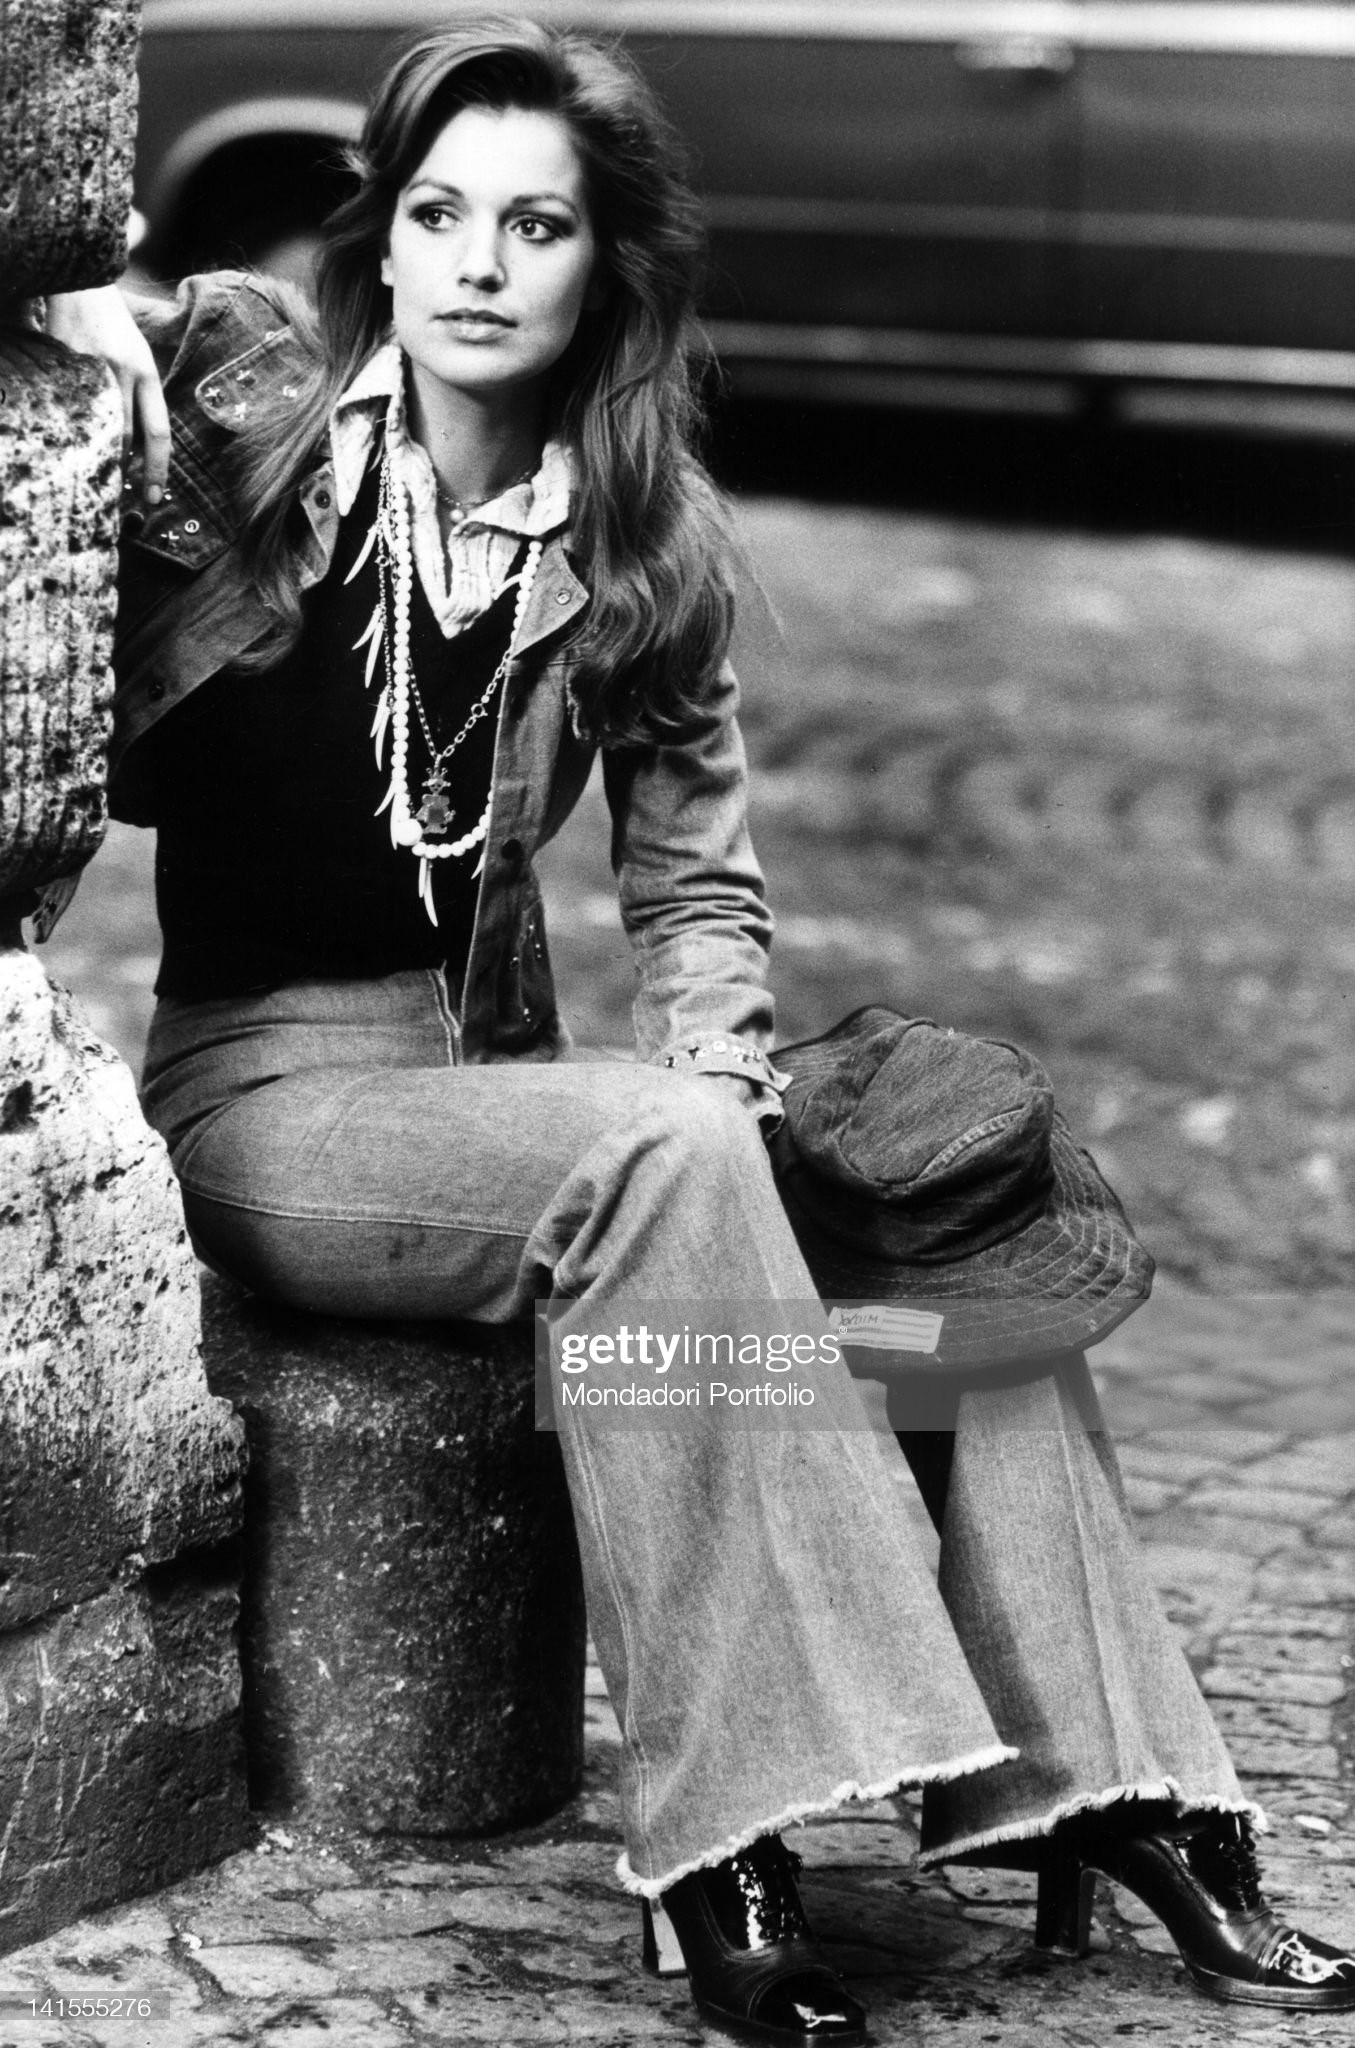 Catherine Spaak sitting in a corner of a street in Rome in 1970s. 